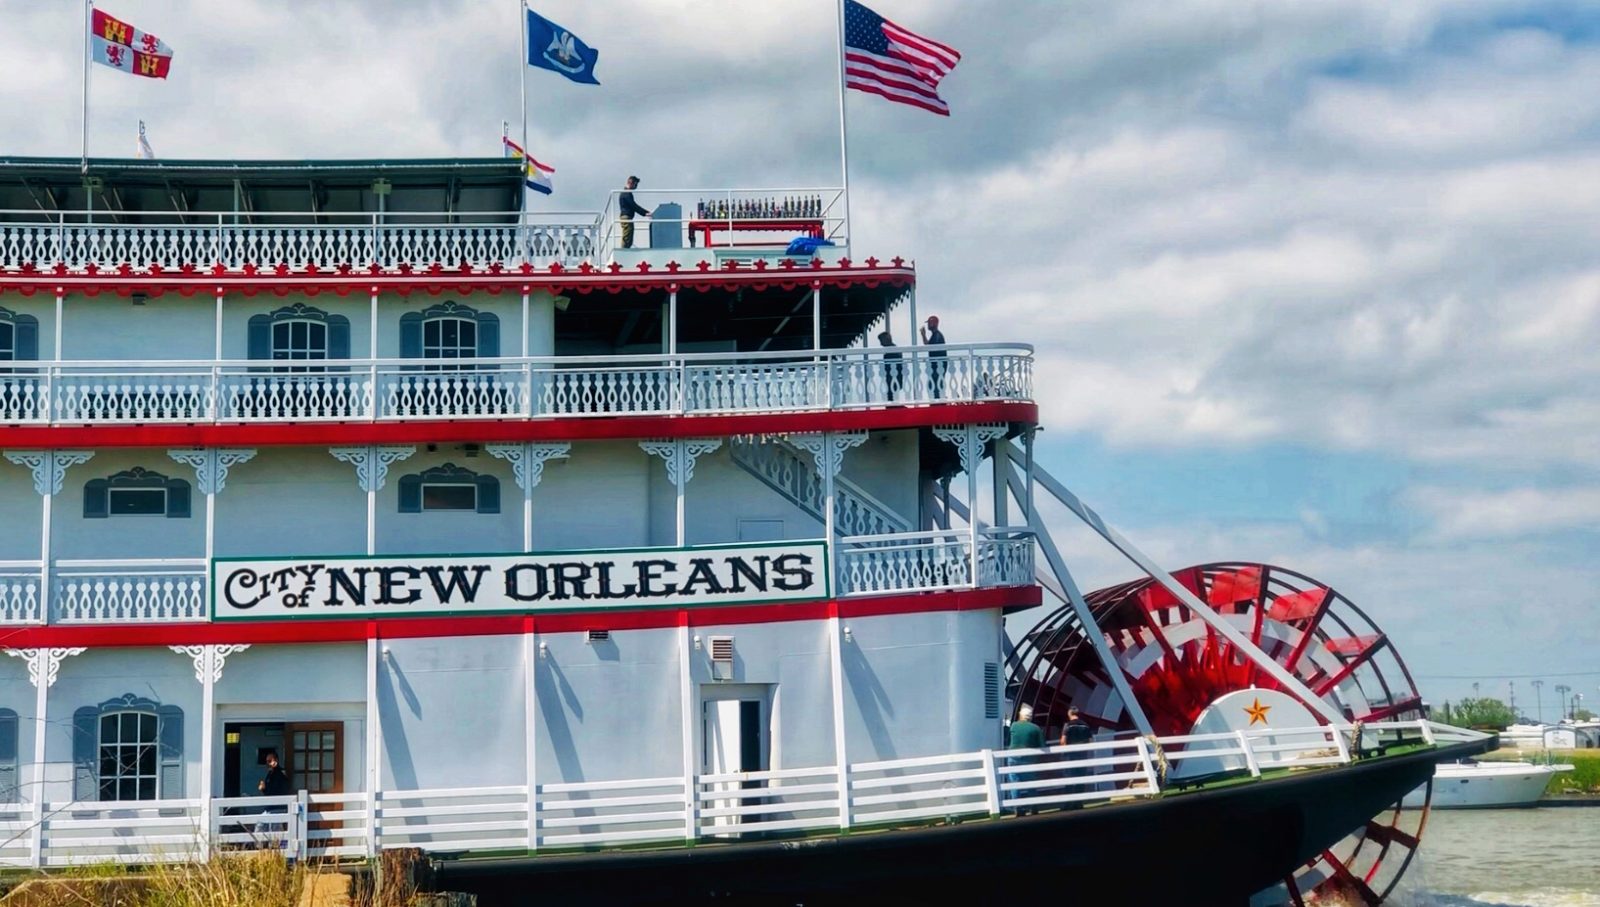 riverboat cruises new orleans louisiana